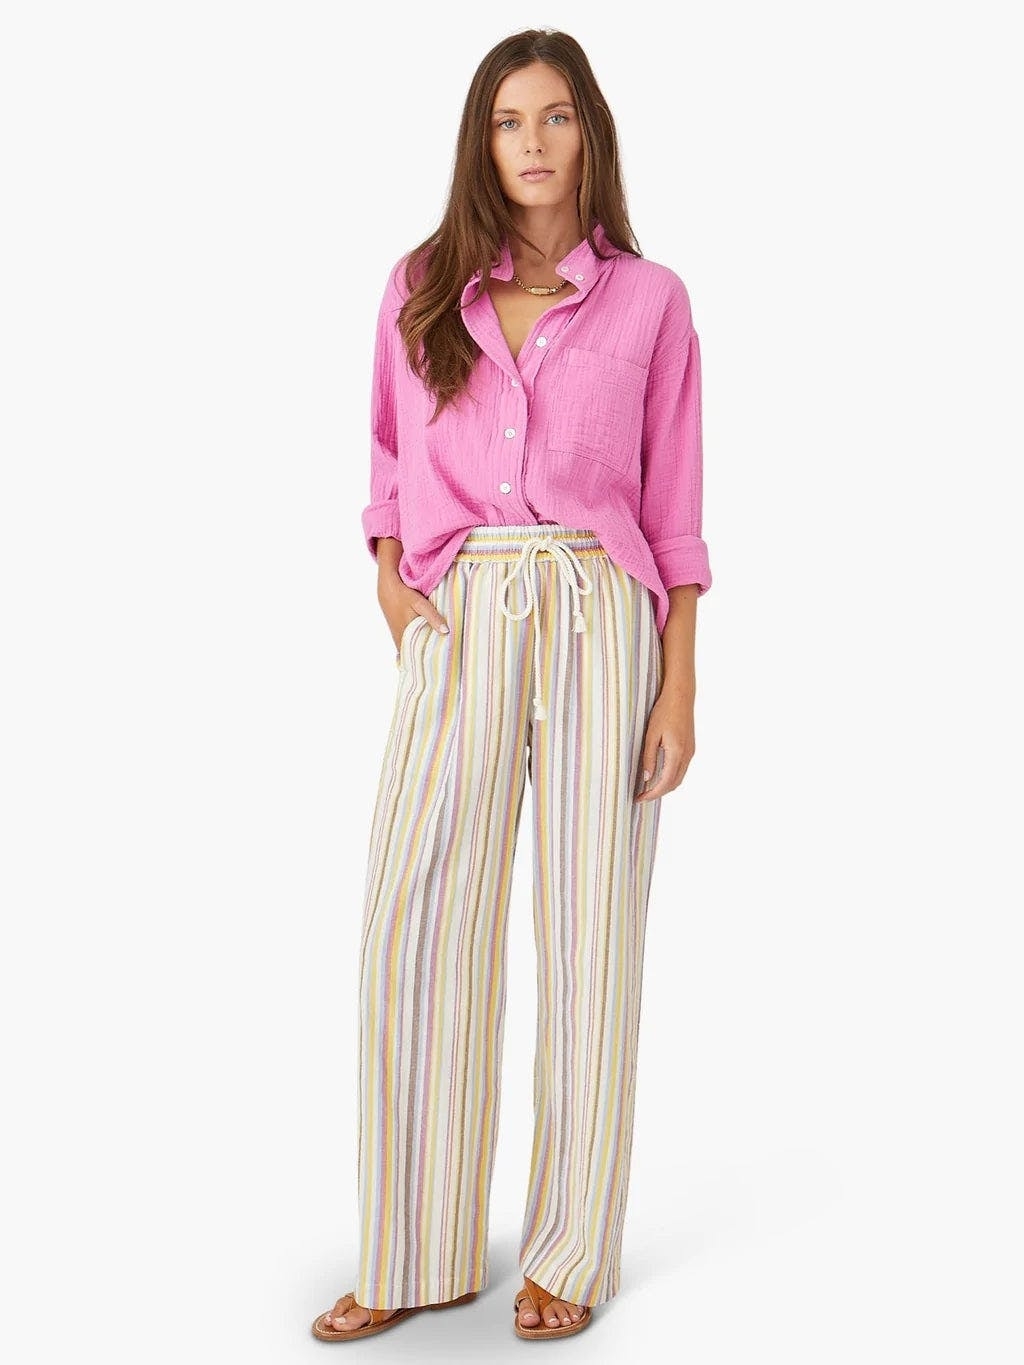 model in straight leg white and pastel color drawstring pants with small vertical stripes